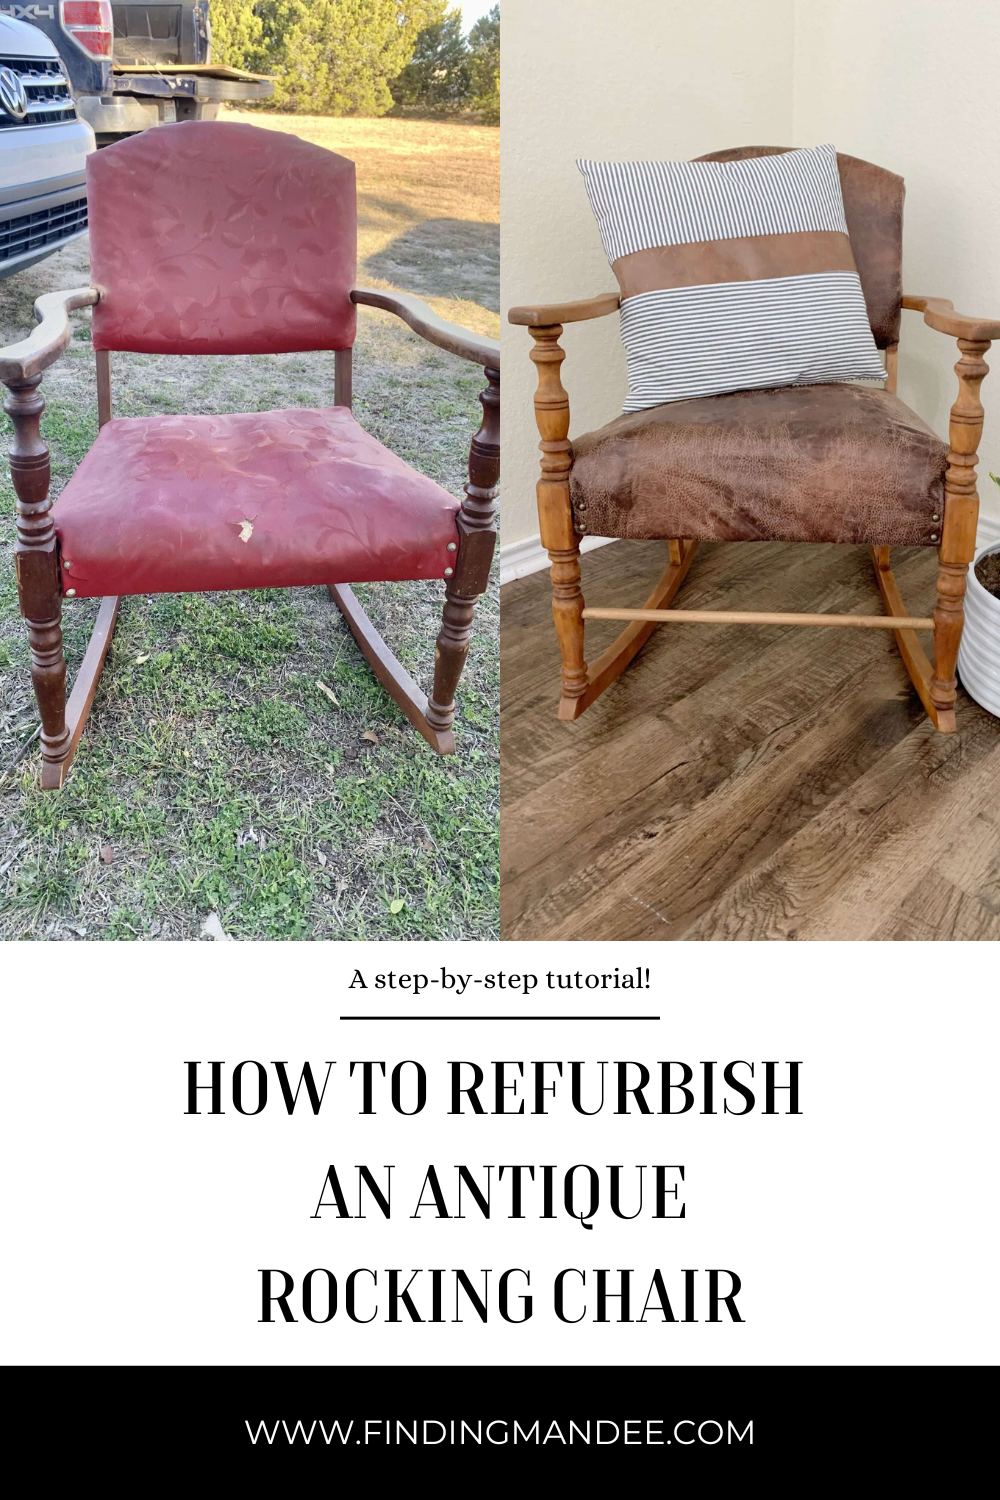 How to Refurbish an Antique Rocking Chair | Finding Mandee